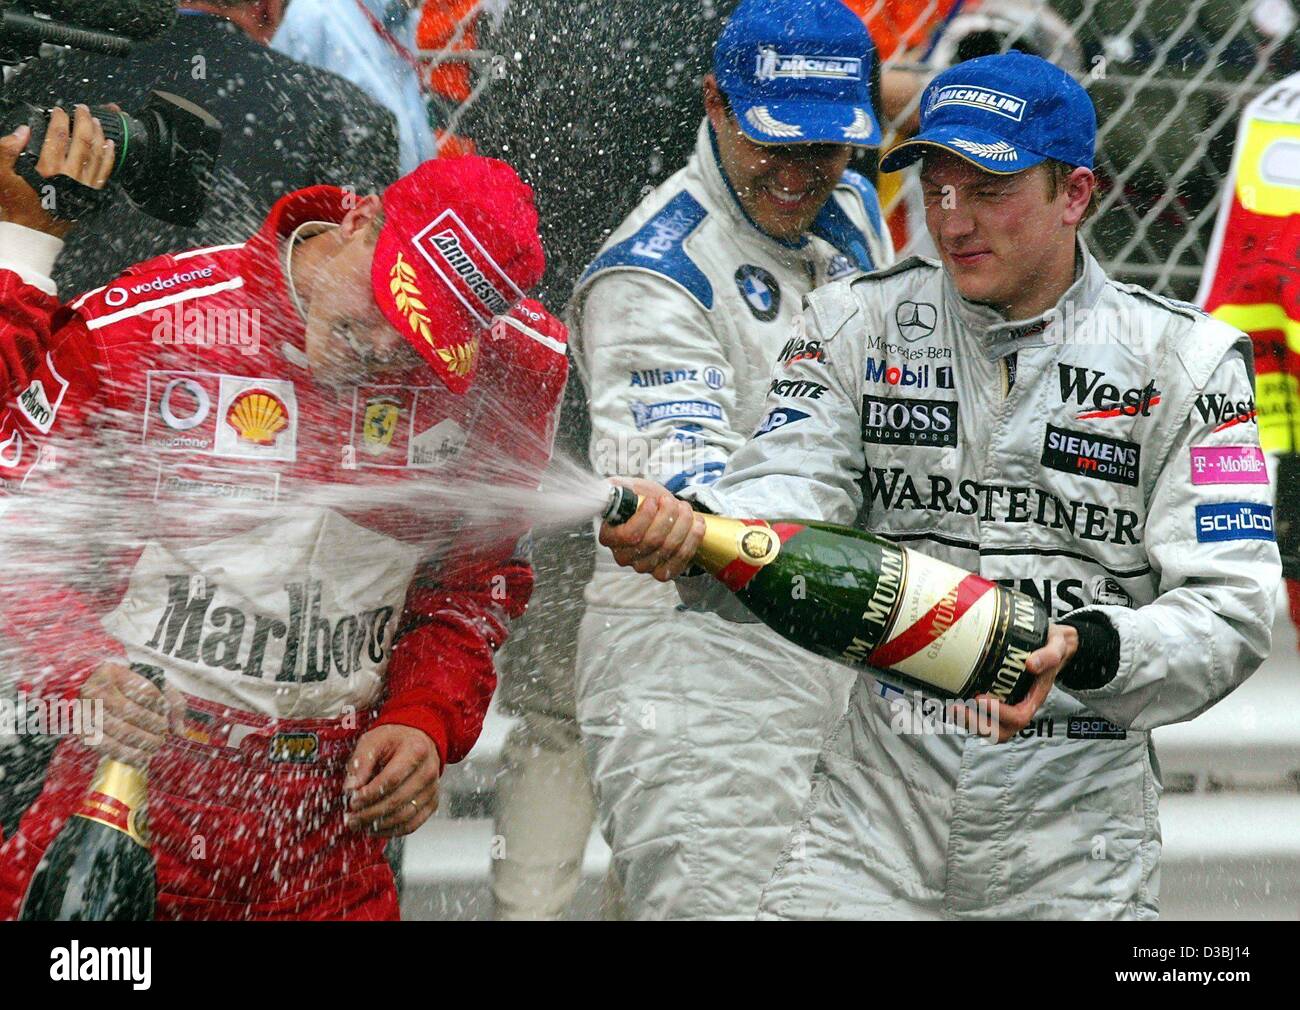 (dpa) - The three first-placed winners of the formula one Grand Prix of Monaco celebrate with champagne in Monte Carlo, 1 June 2003. Colombian Juan Pablo Montoya of BMW Williams (C) takes first place, Finnish Kimi Raekkoenen (R, McLaren Mercedes) finishes second and German world champion Michael Sch Stock Photo